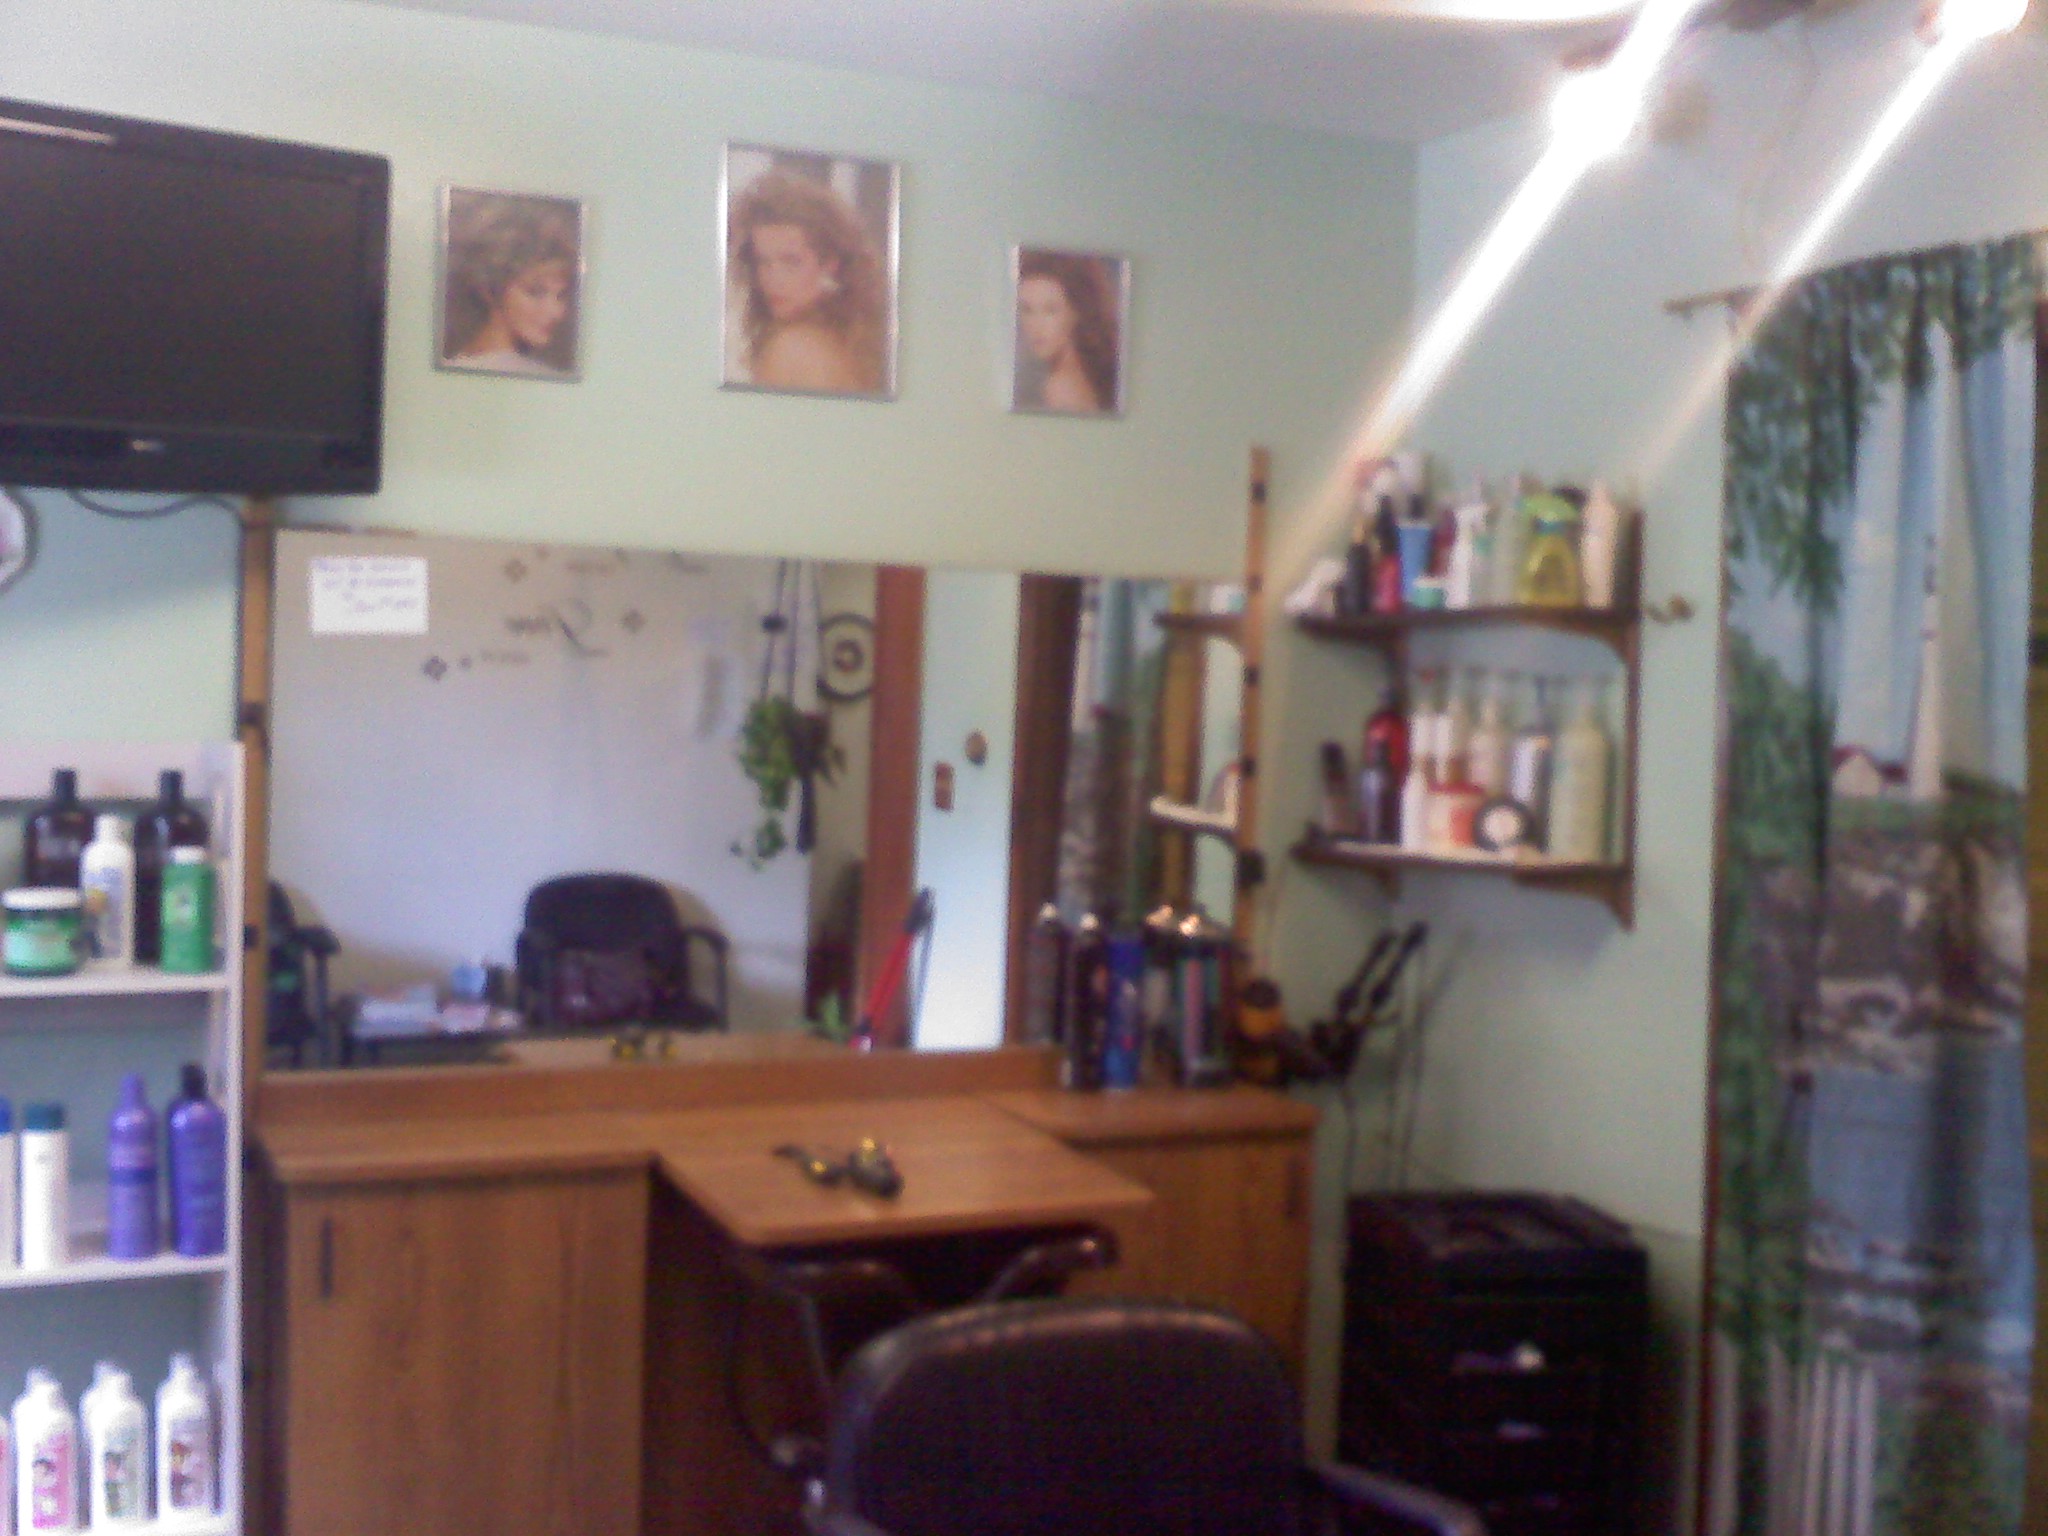 Kimberly's Ultra Classic Cuts 109 College Ave, Grove City Pennsylvania 16127